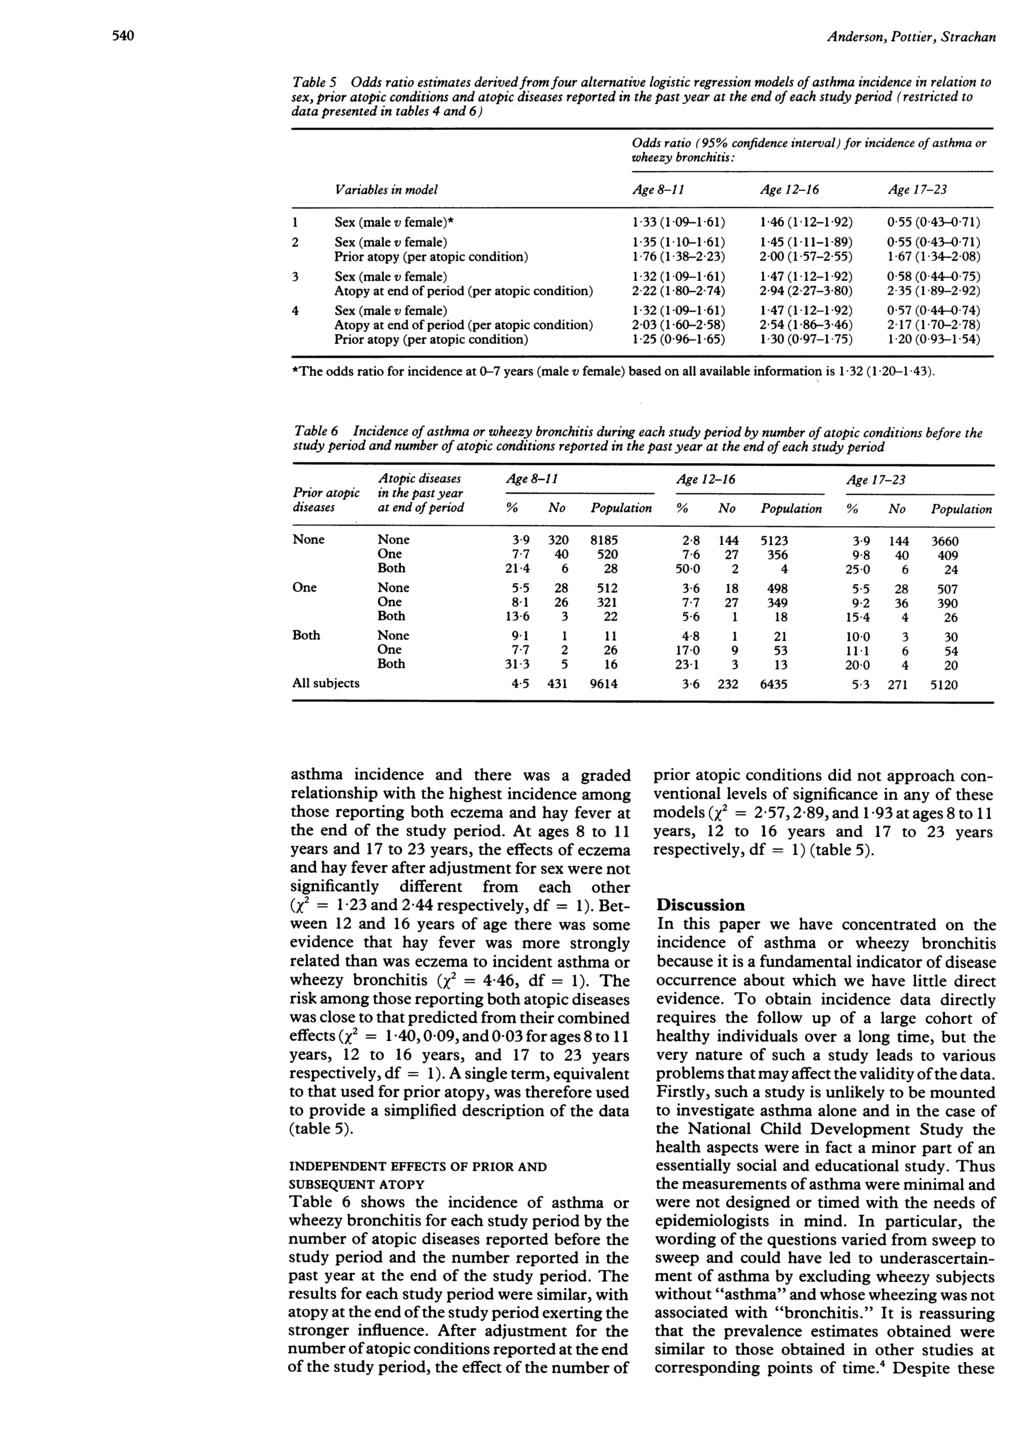 540 Anderson, Pottier, Strachan Table 5 Odds ratio estimates derivedfrom four alternative logistic regression models of asthma incidence in relation to sex, prior atopic conditions and atopic